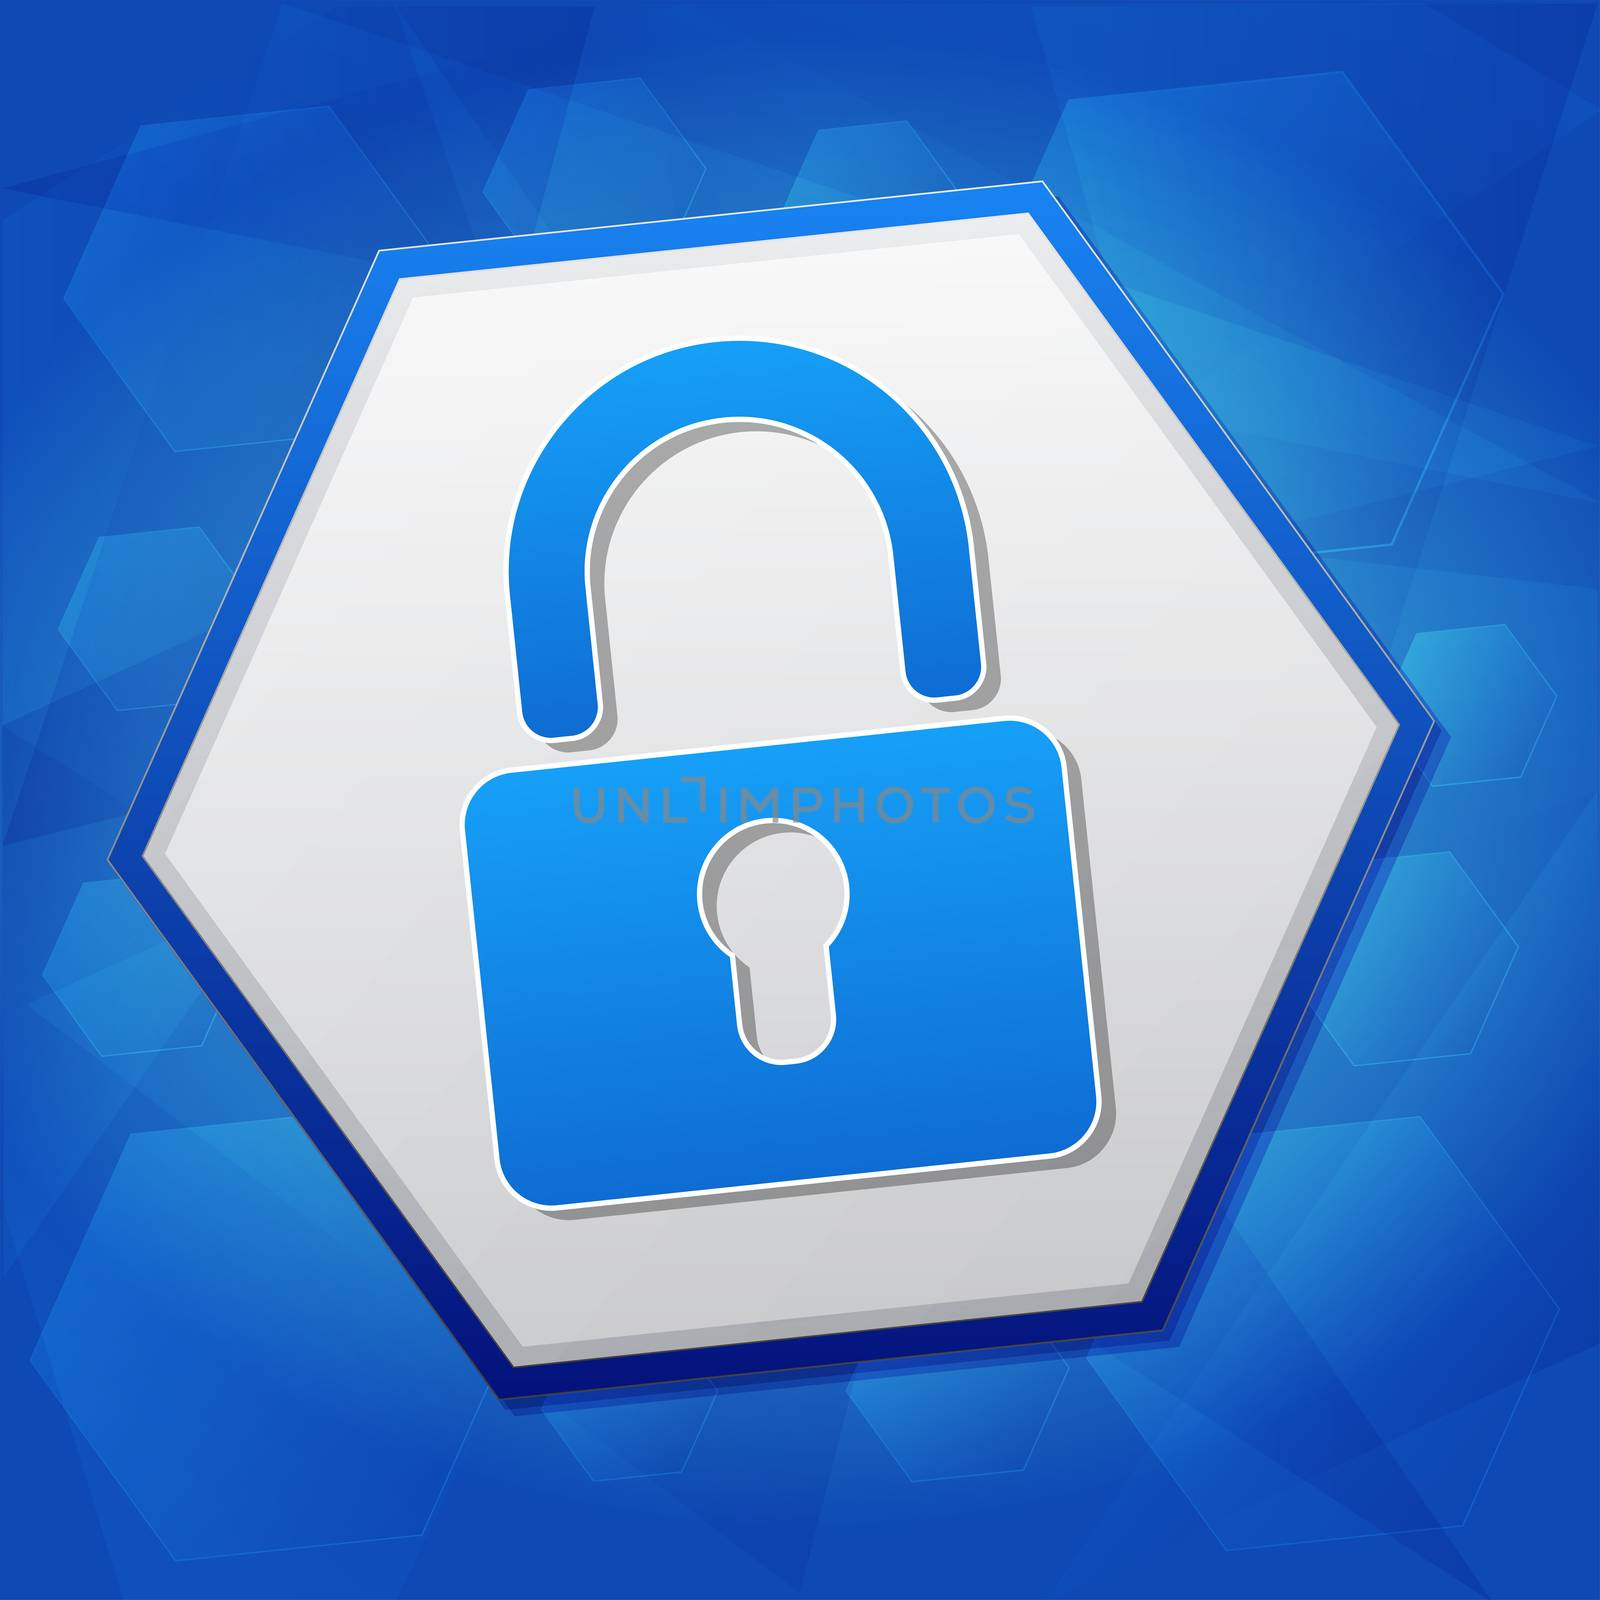 padlock sign in hexagon over blue background, flat design by marinini